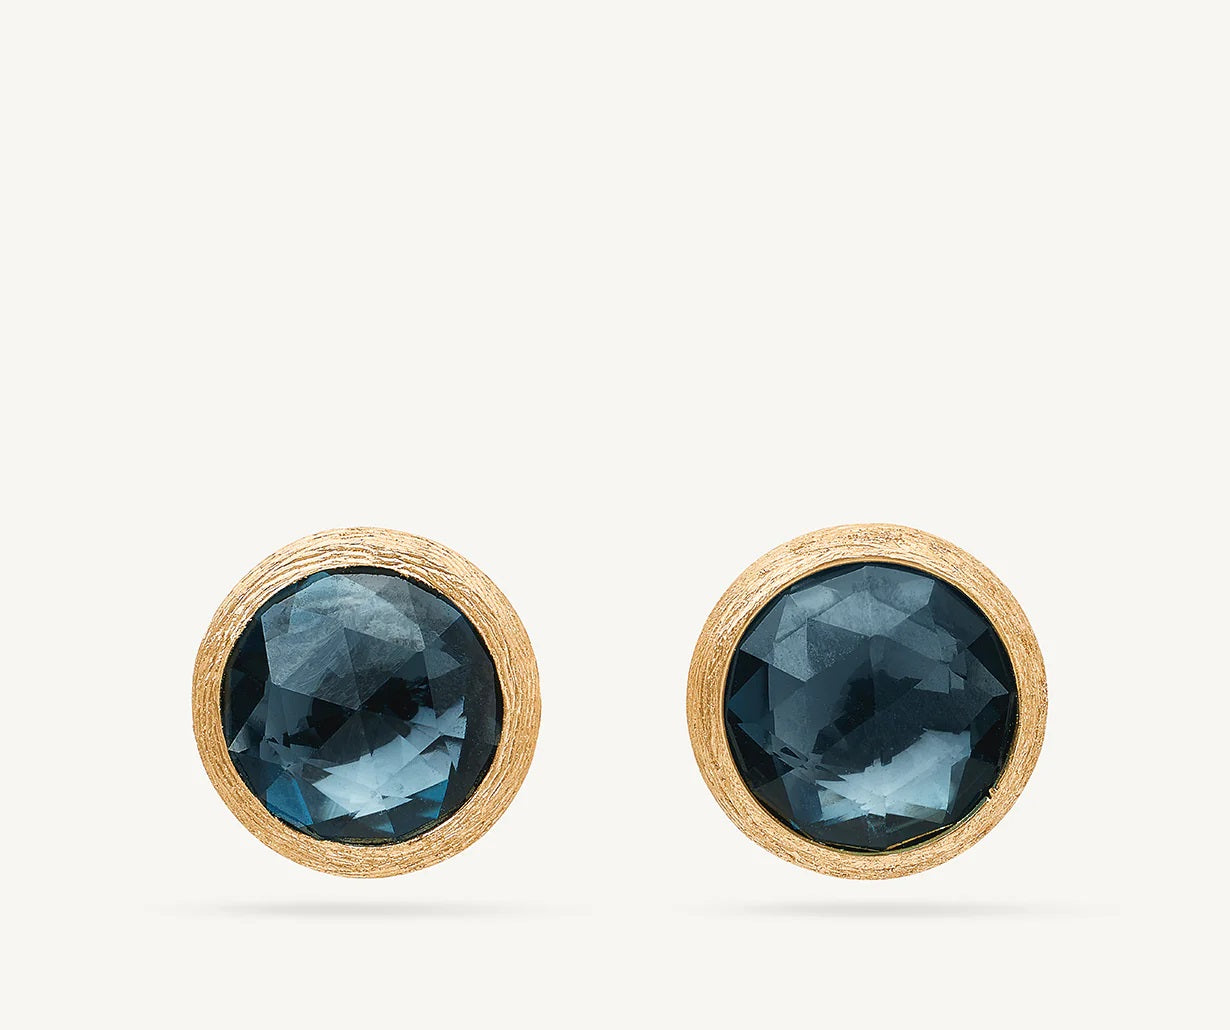 18K GOLD LONDON BLUE TOPAZ EARRINGS FROM THE JAIPUR COLLECTION